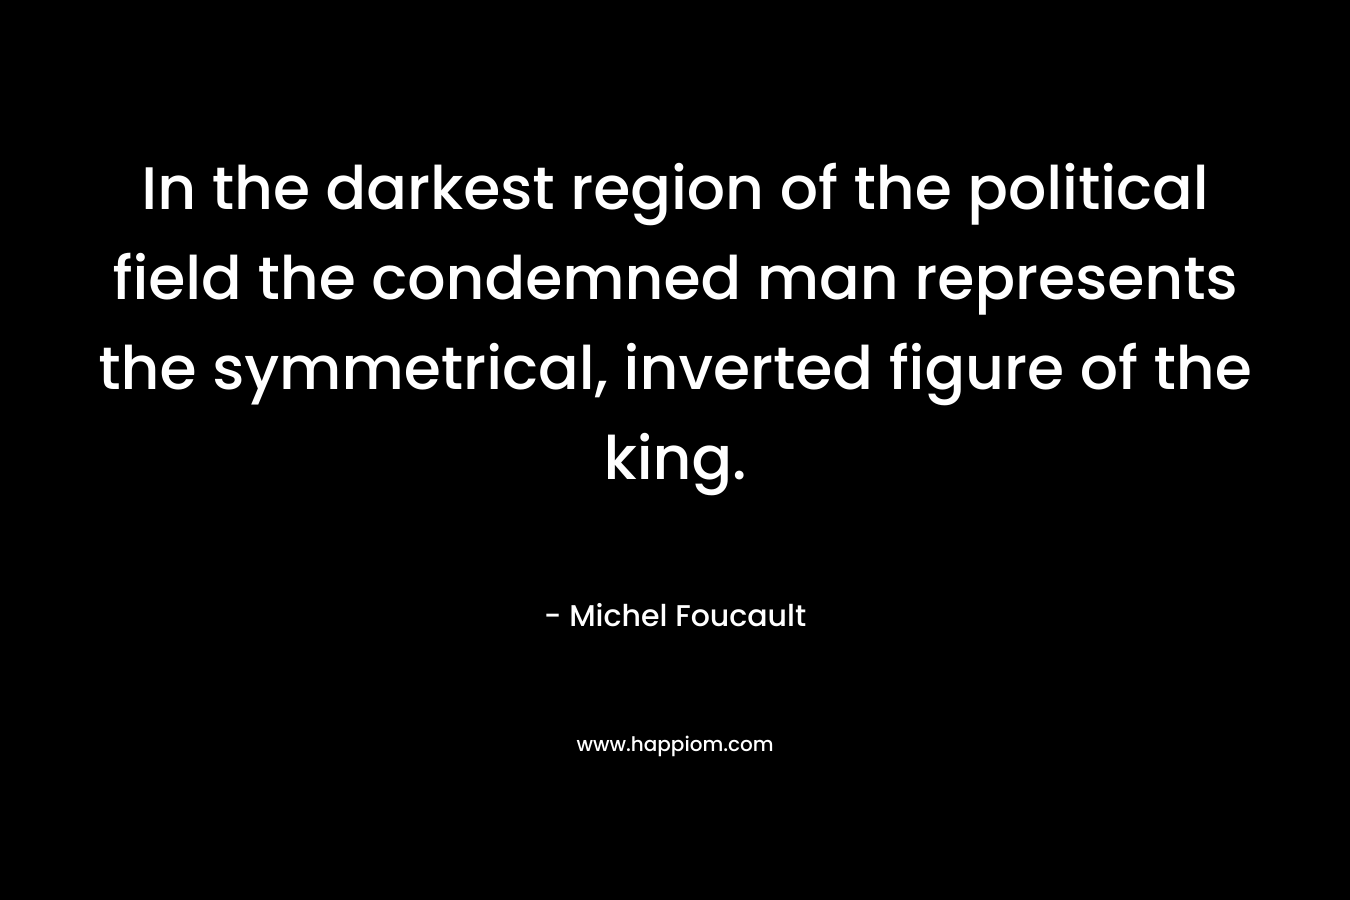 In the darkest region of the political field the condemned man represents the symmetrical, inverted figure of the king.